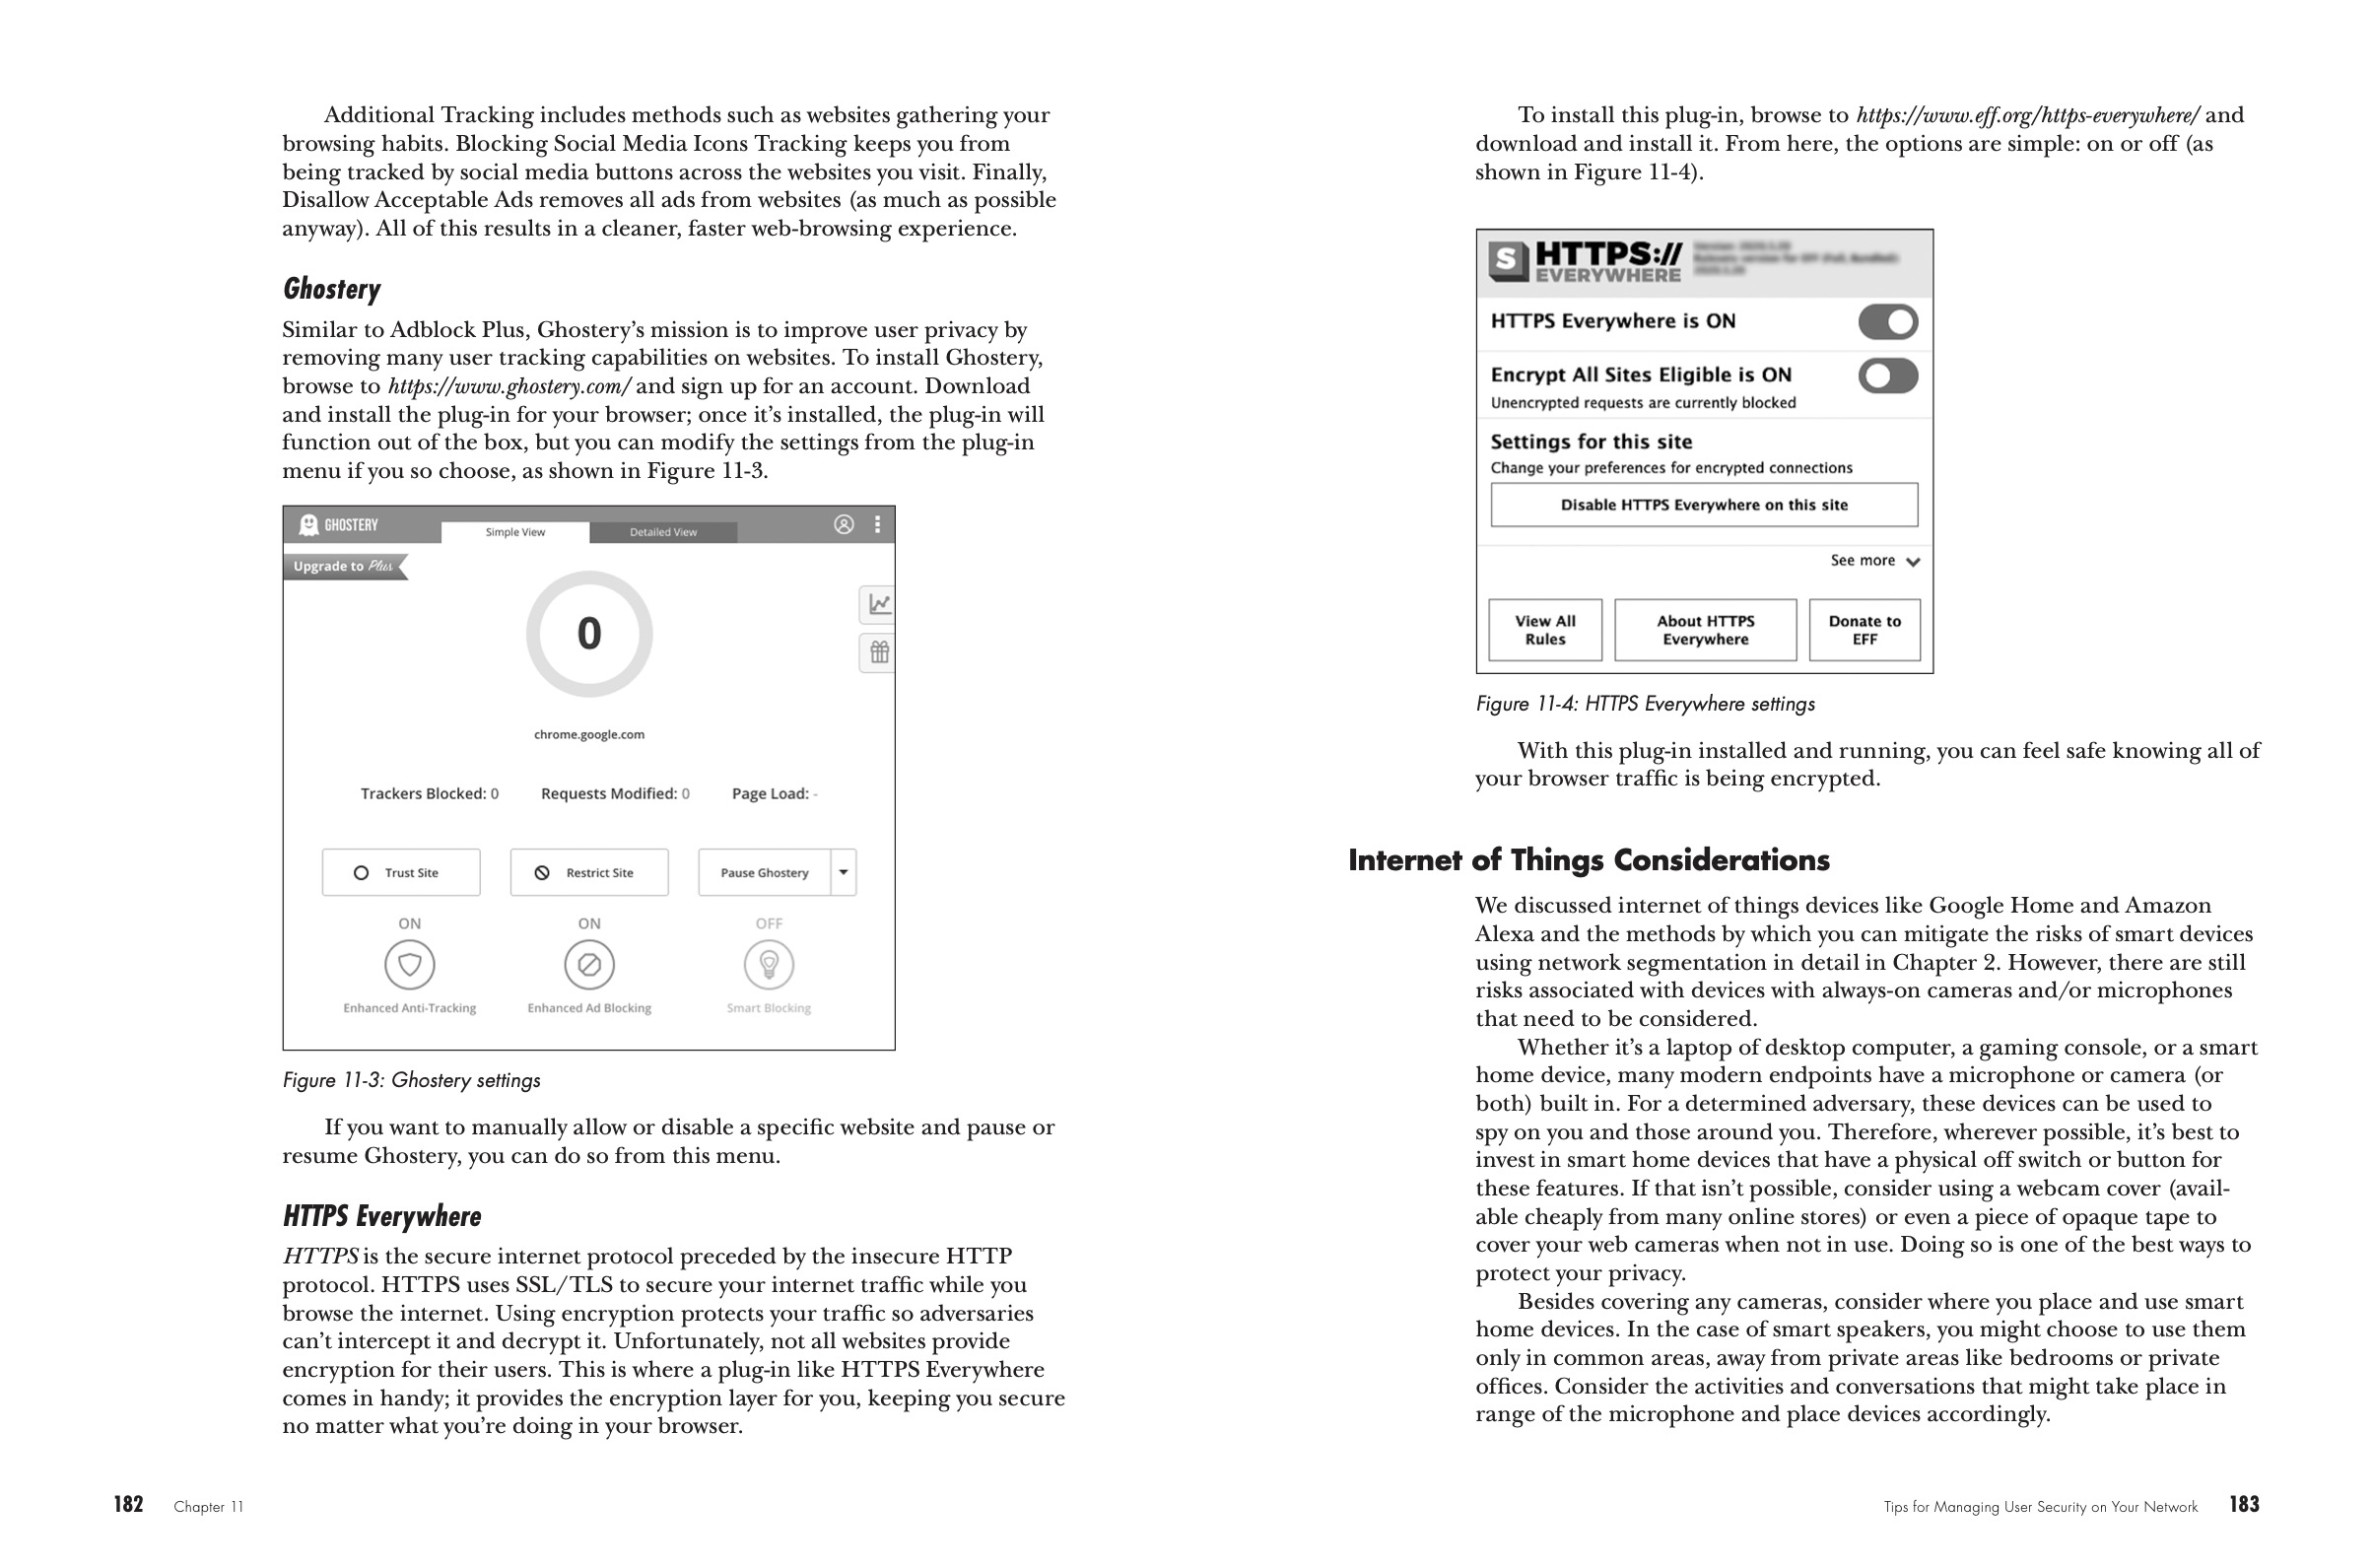 Cybersecurity for Small Networks pages 182-183